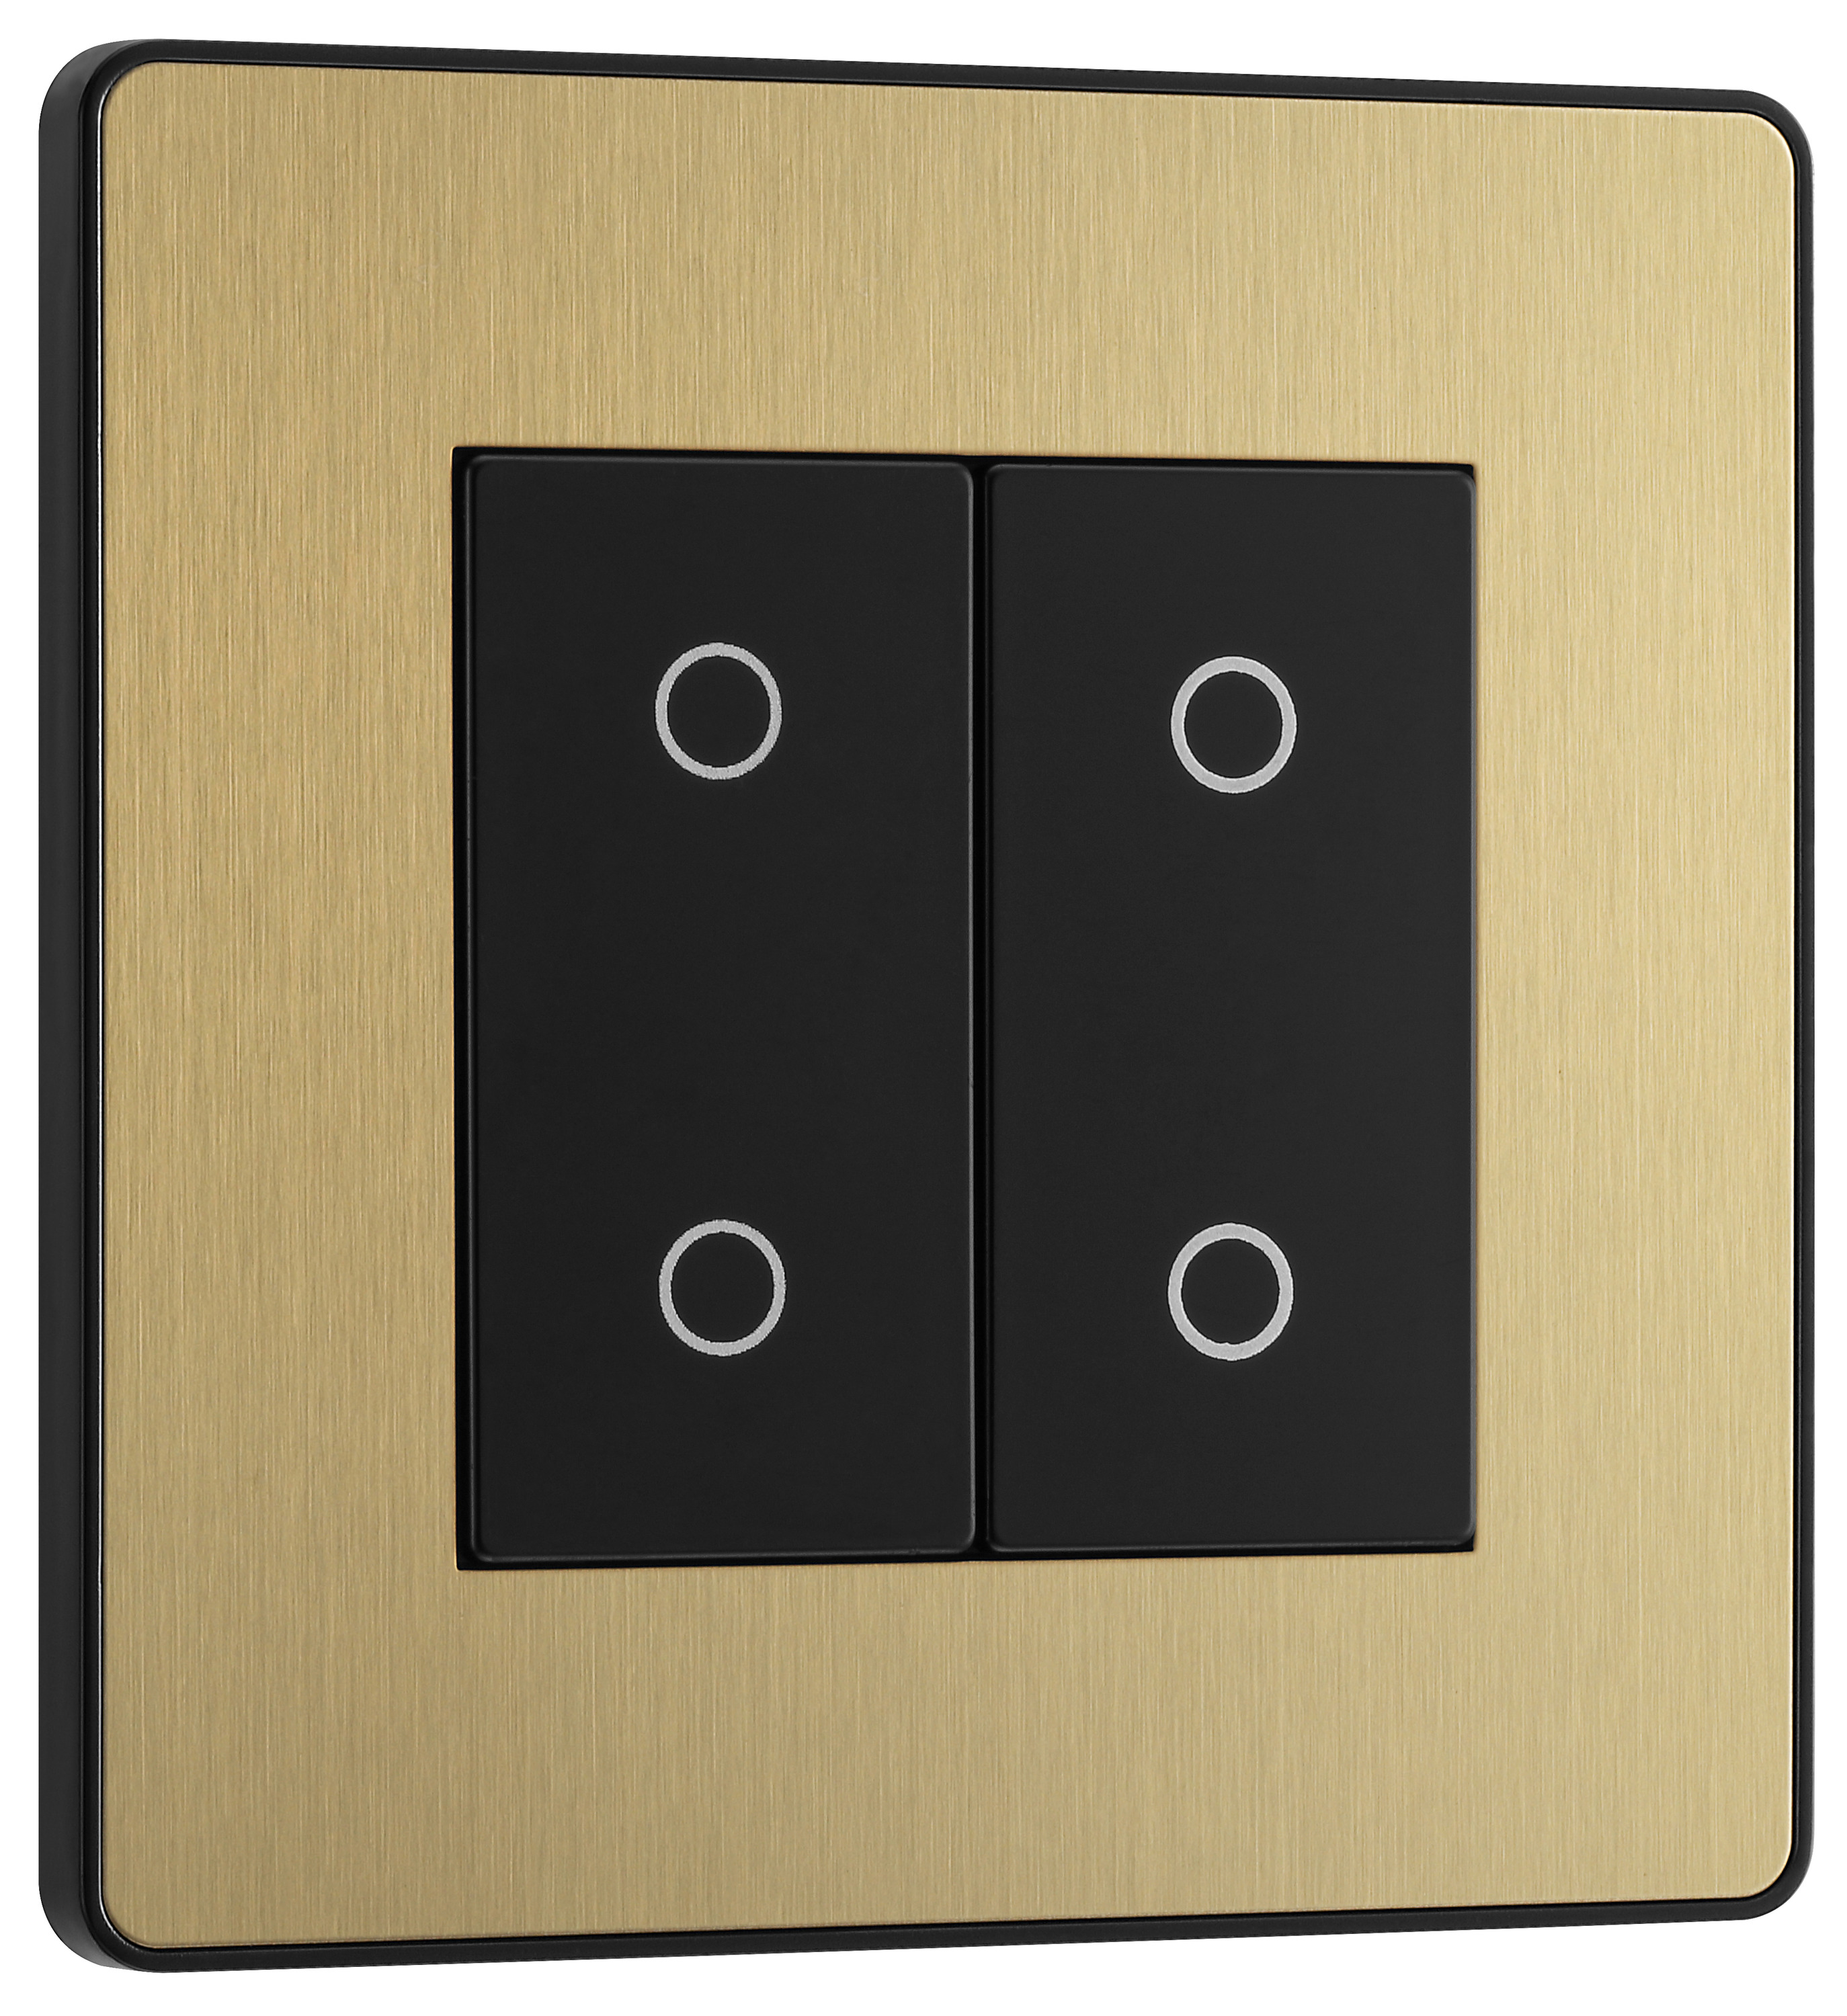 BG Evolve Master Brushed Brass 2 Way Double Touch Dimmer Switch - 200W